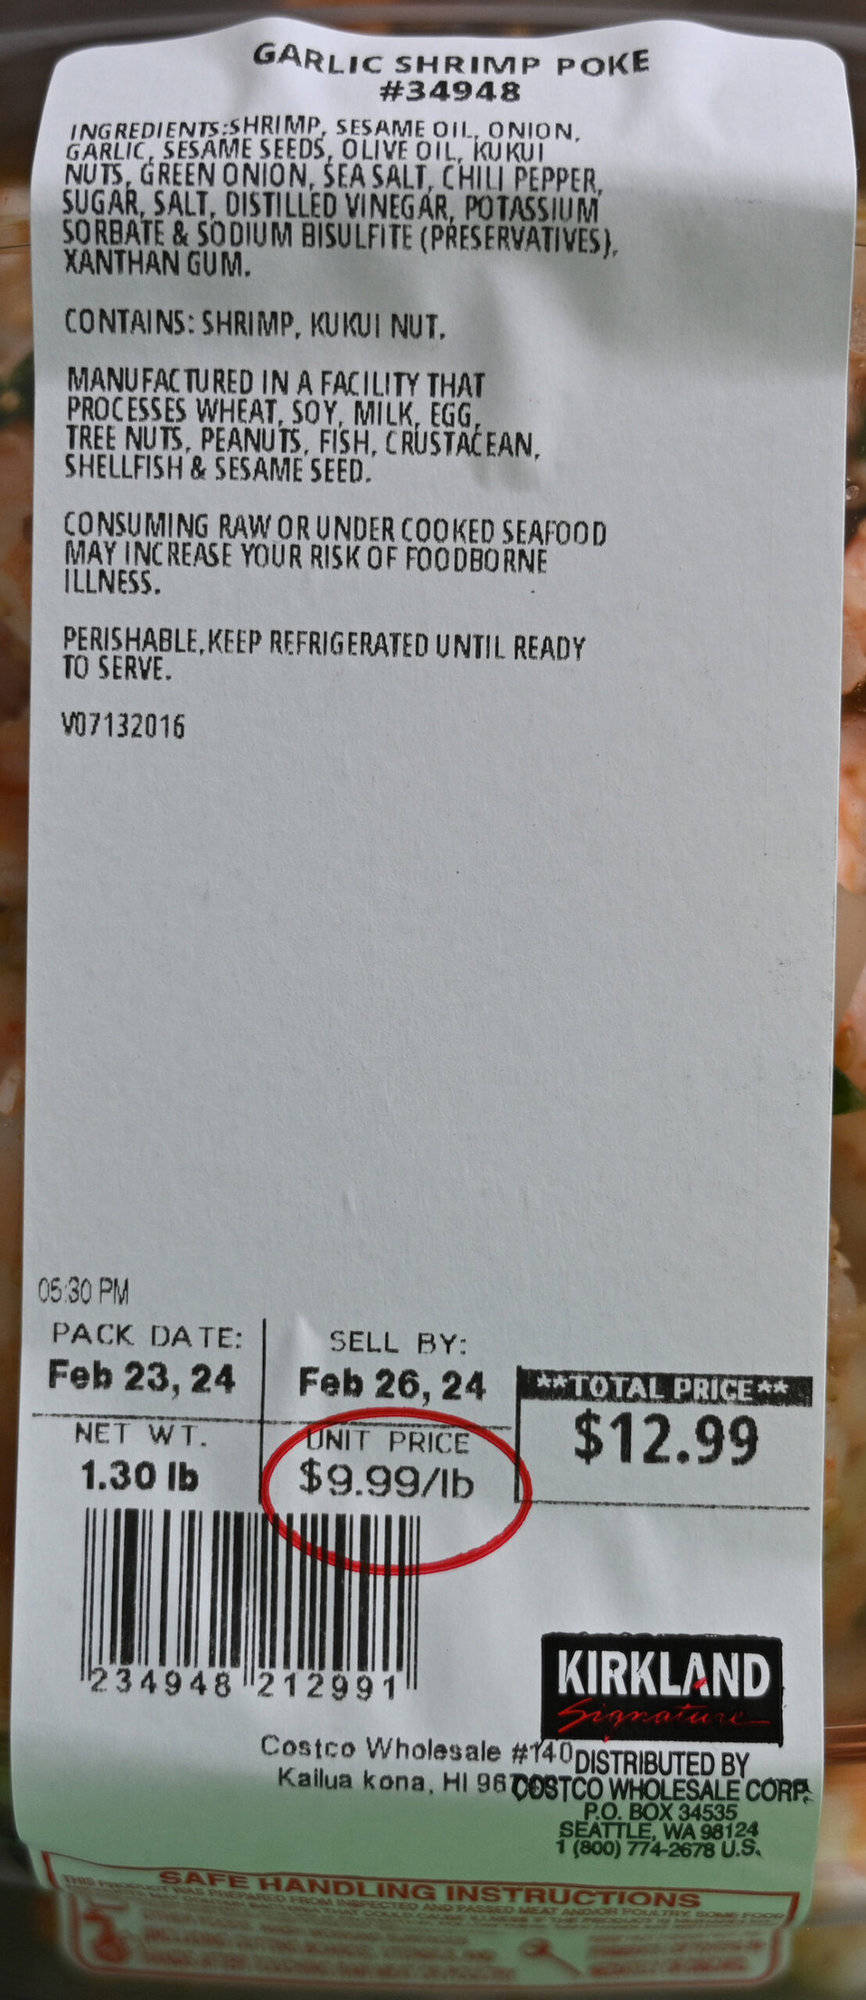 Closeup image of the front label of the Garlic Shrimp Poke showing the best before date and cost.